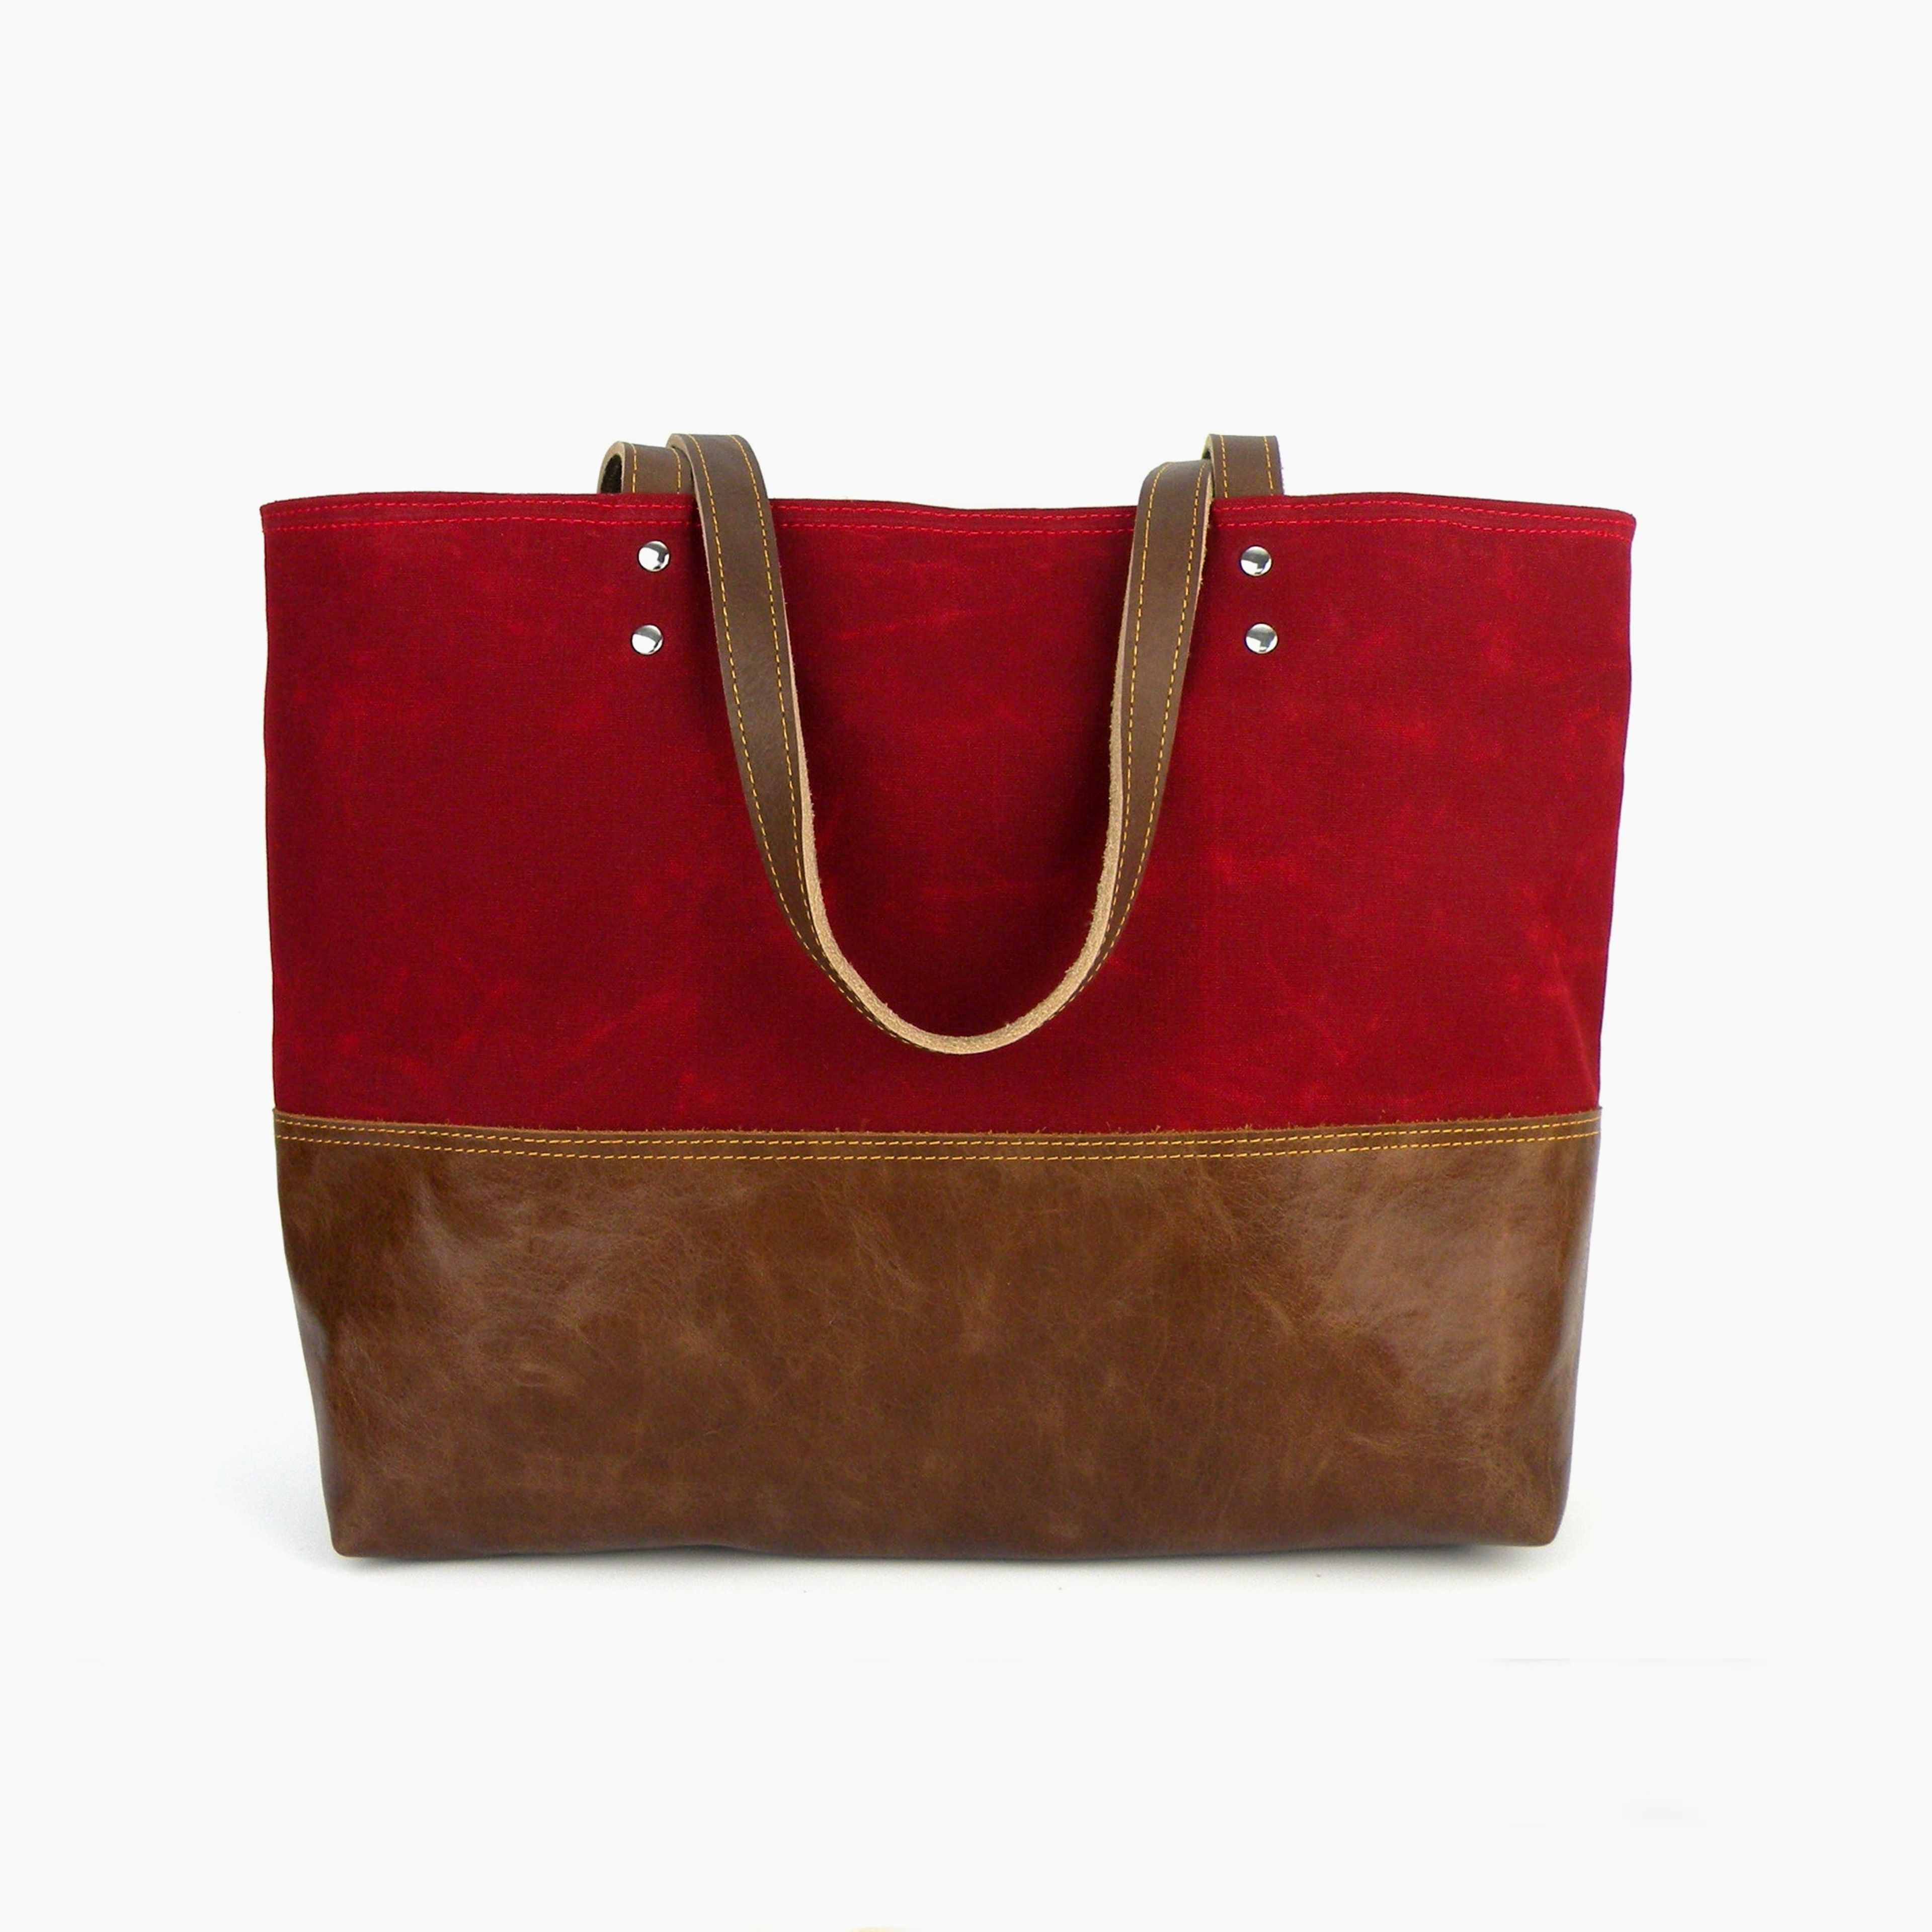 Carryall Tote in Red Waxed Canvas